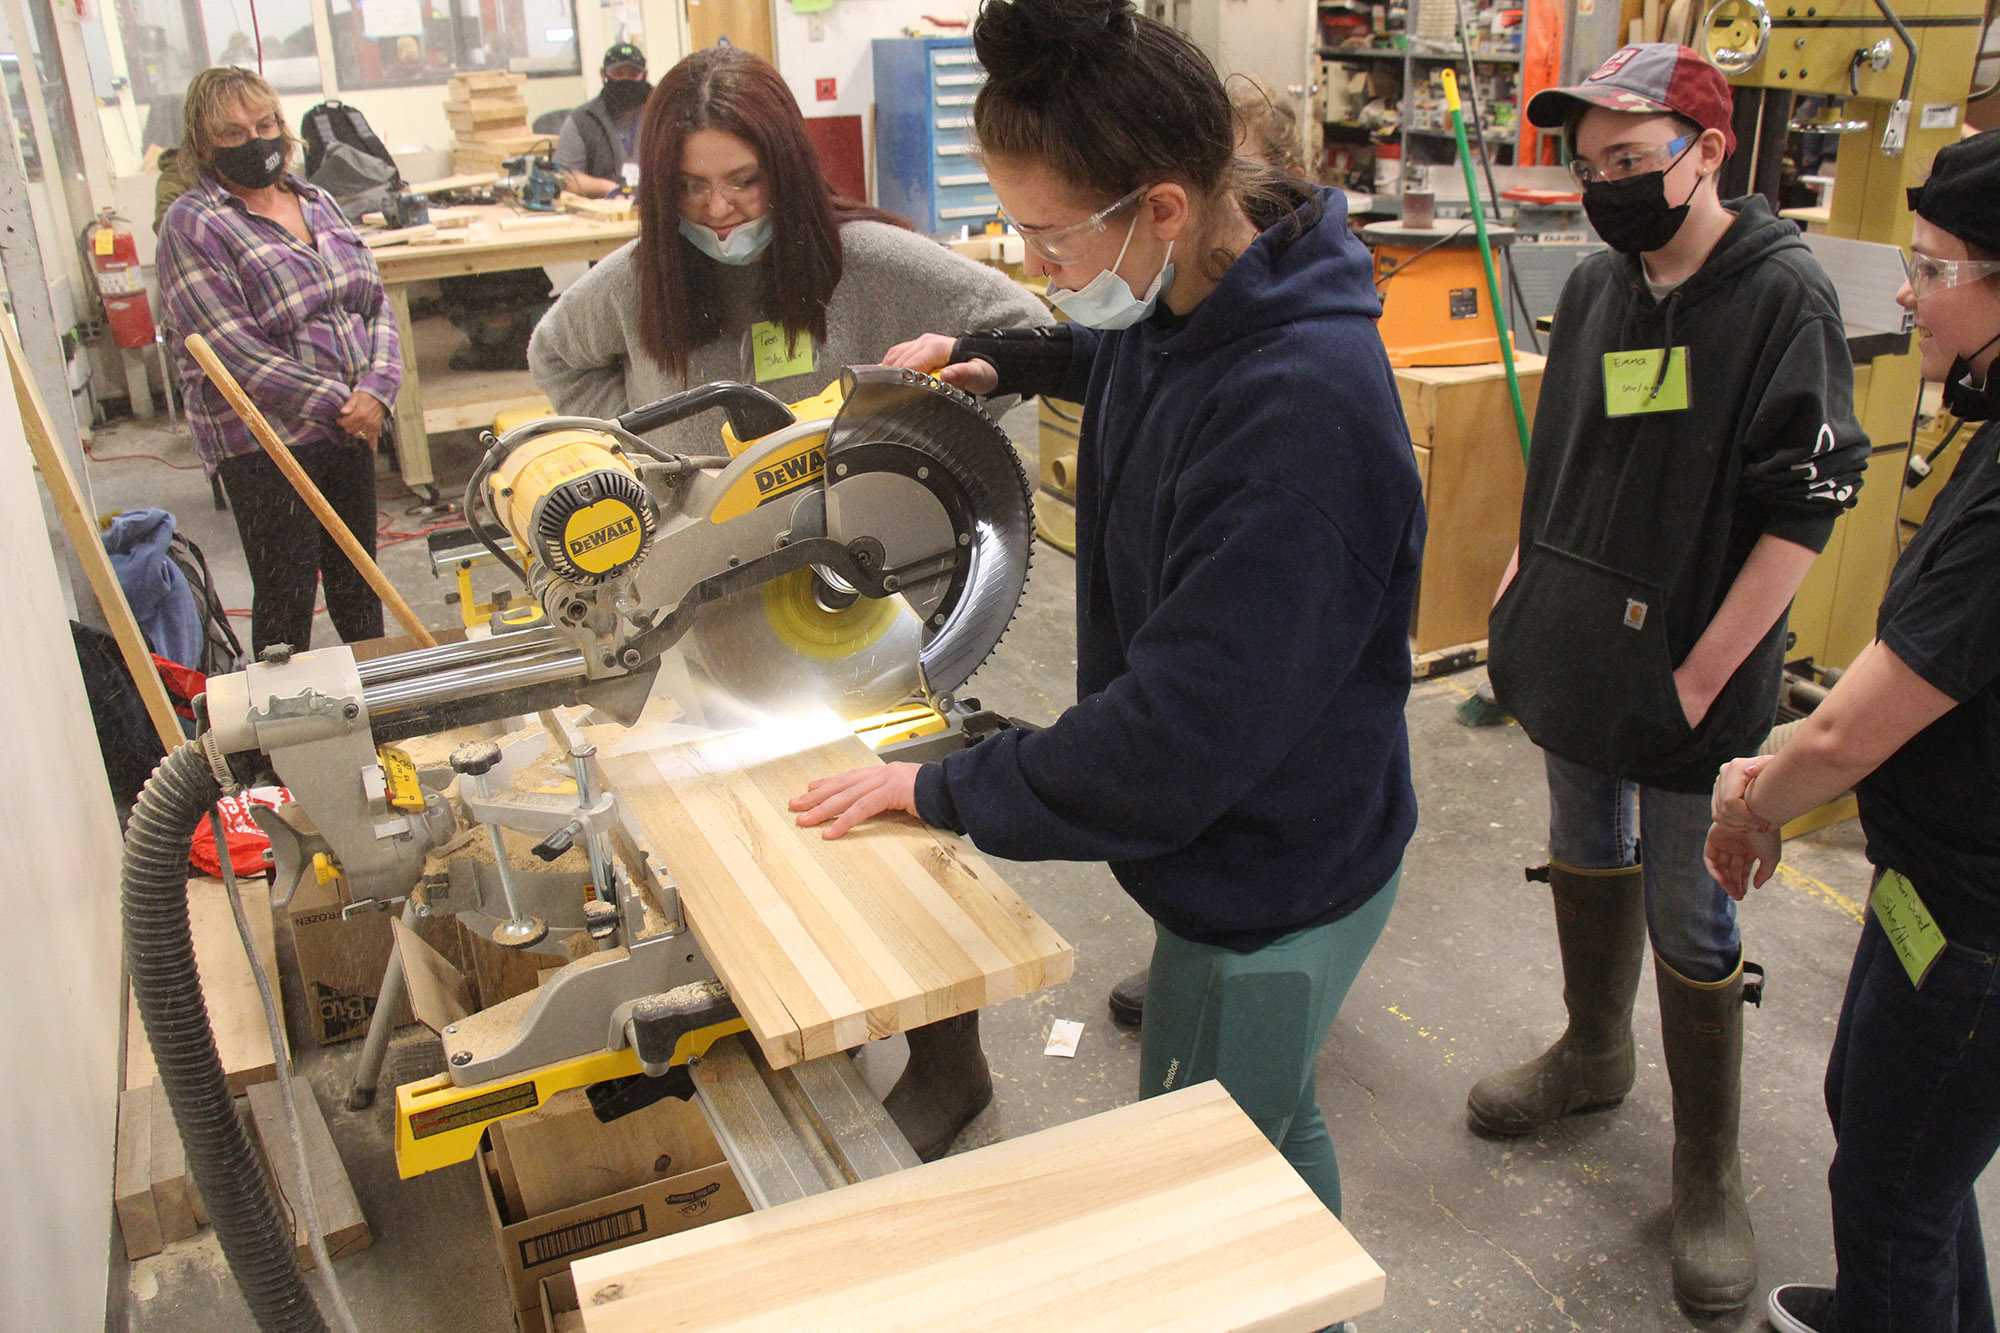 2. A high school student demonstrates for middle school girls how to cut wood using an electric saw.